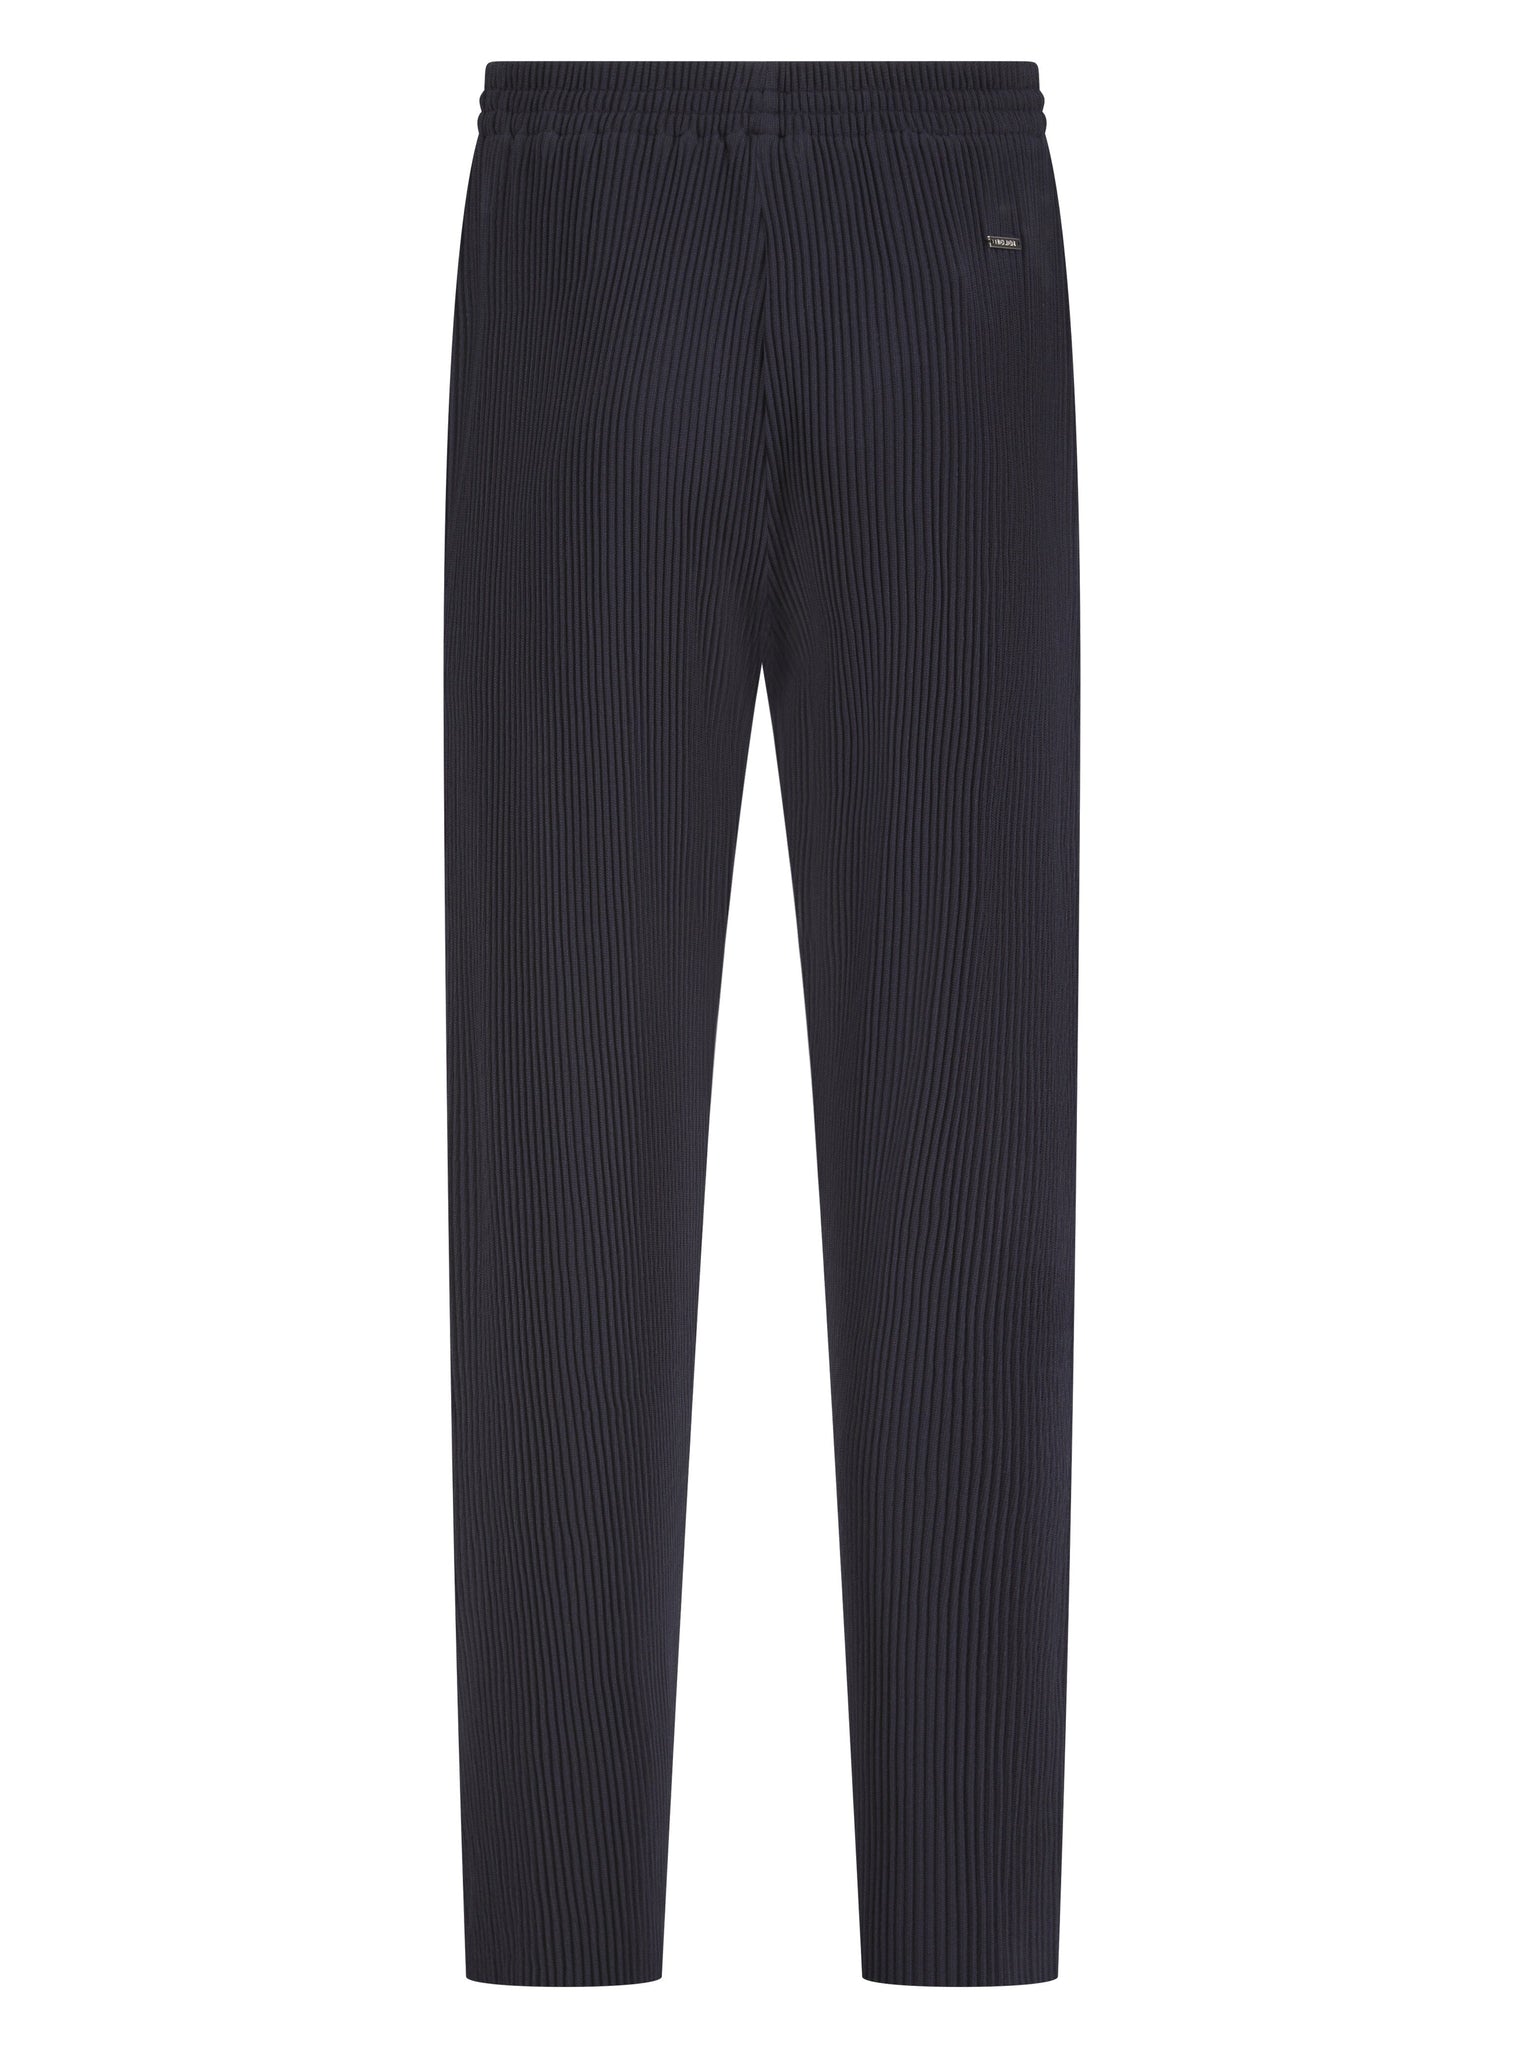 Navy Pleated Trouser